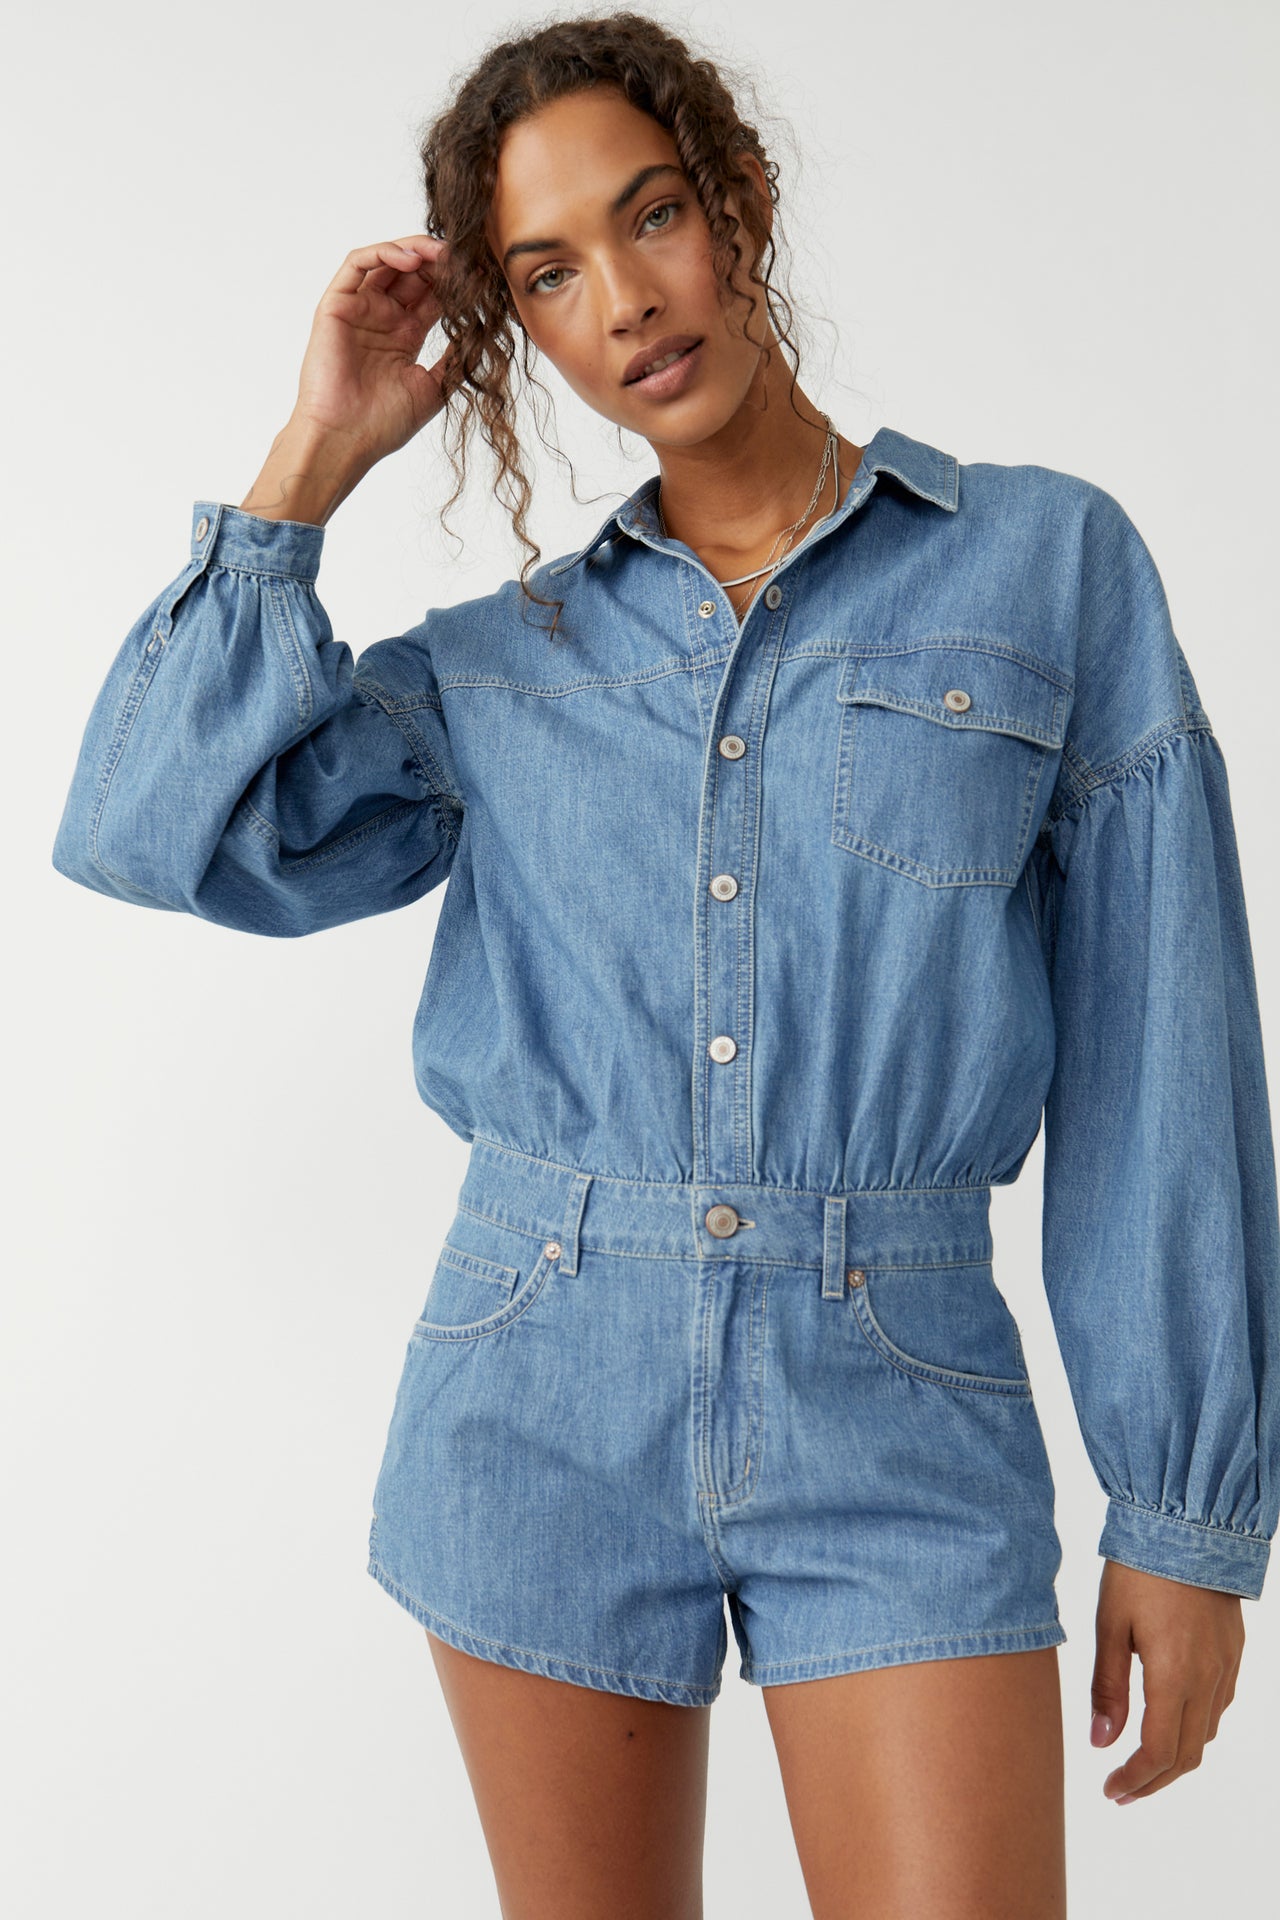 Zodiac Chambray One Piece Moon Blue, Romper Dress by Free People | LIT Boutique